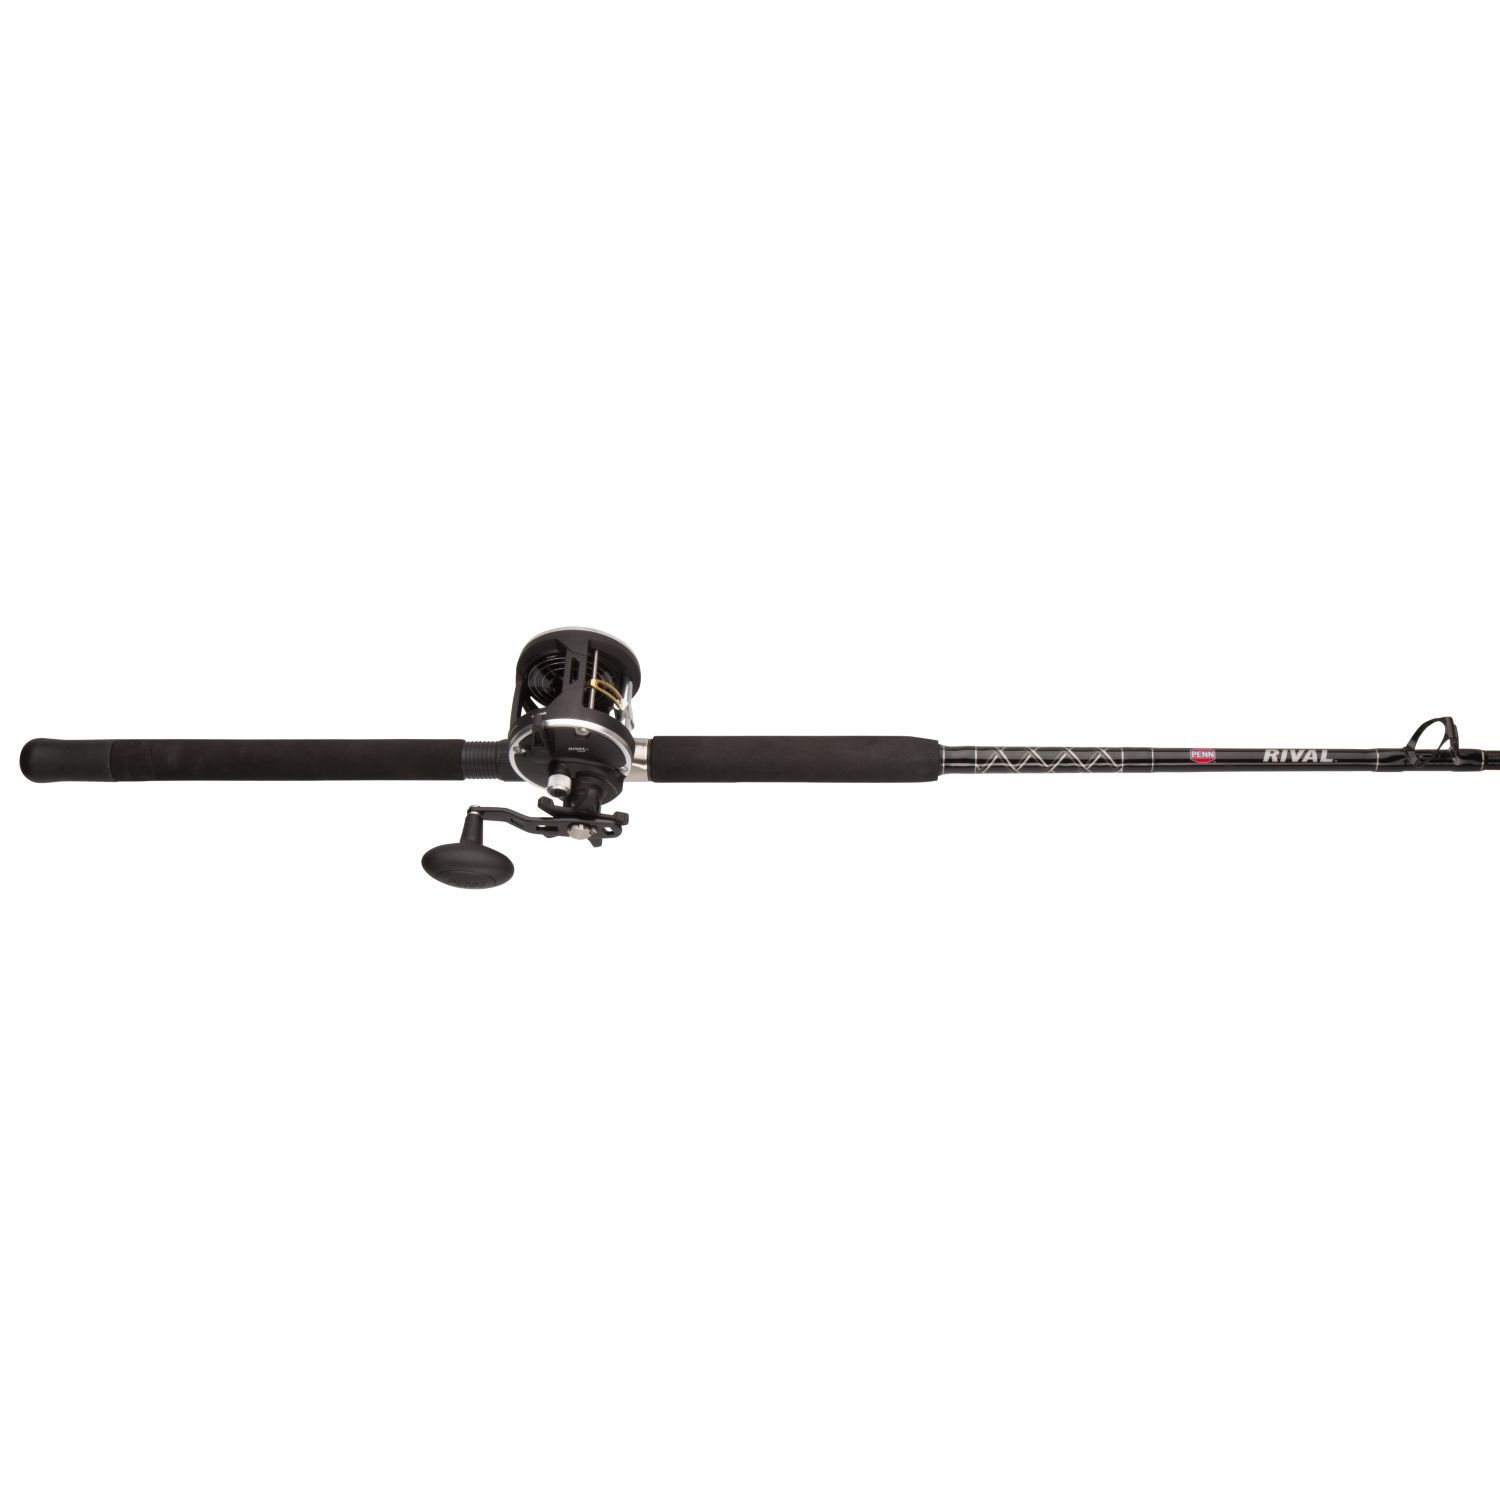 PENN 6'6 Rival™ Levelwind Conventional Combo, Size 30 Reel